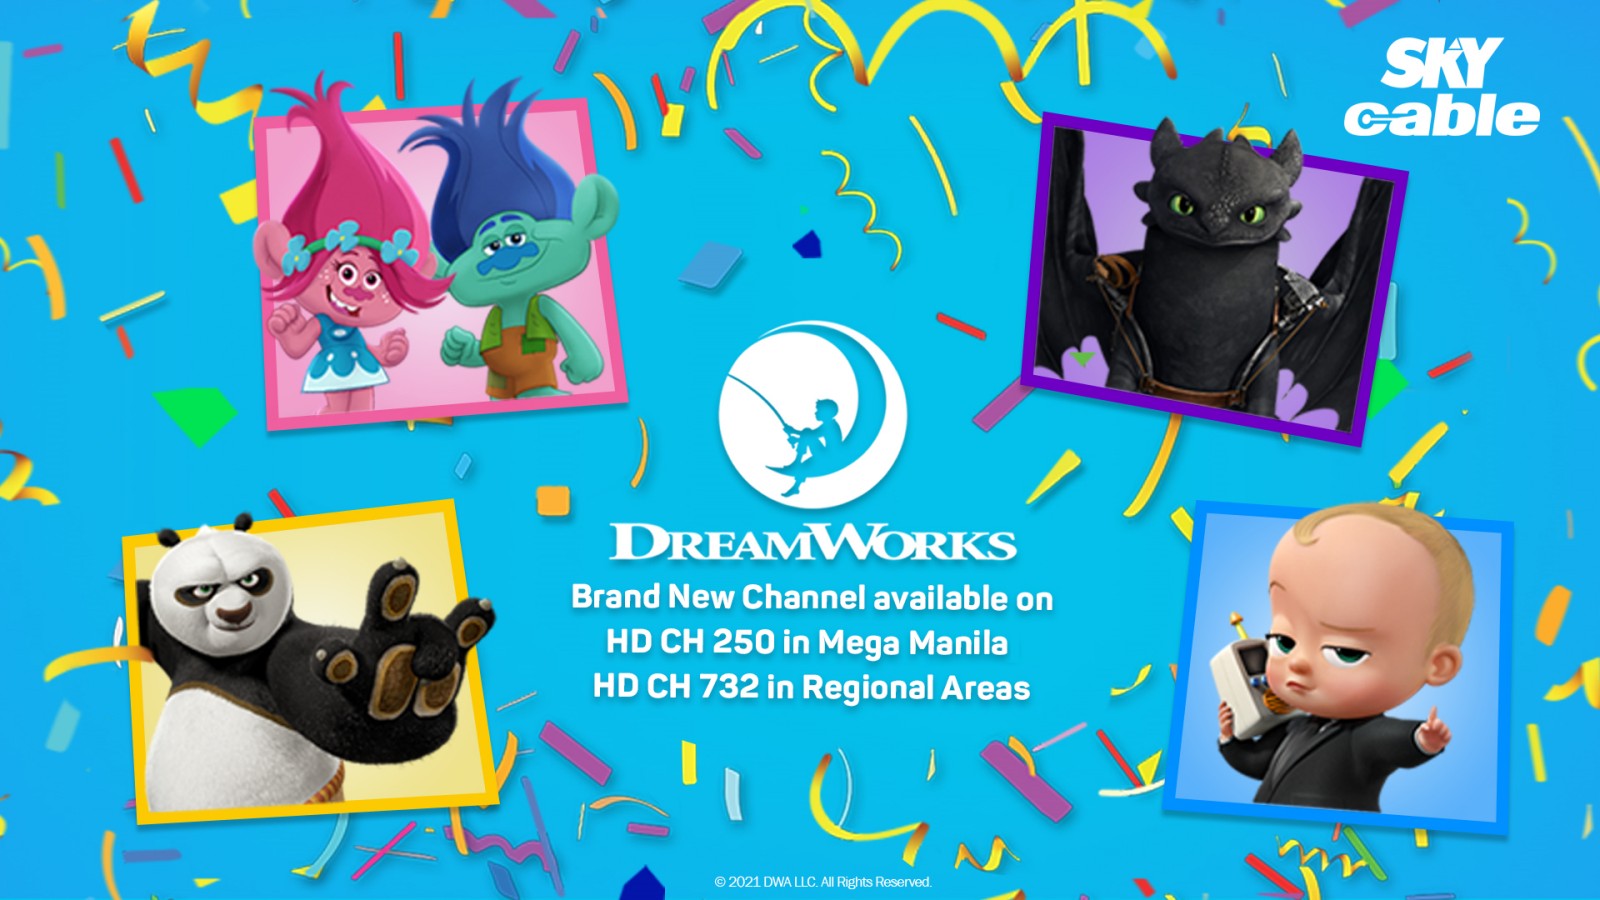 NBCUniversal International Networks & Direct-to-Consumer launches DreamWorks on SKYcable in the Philippines